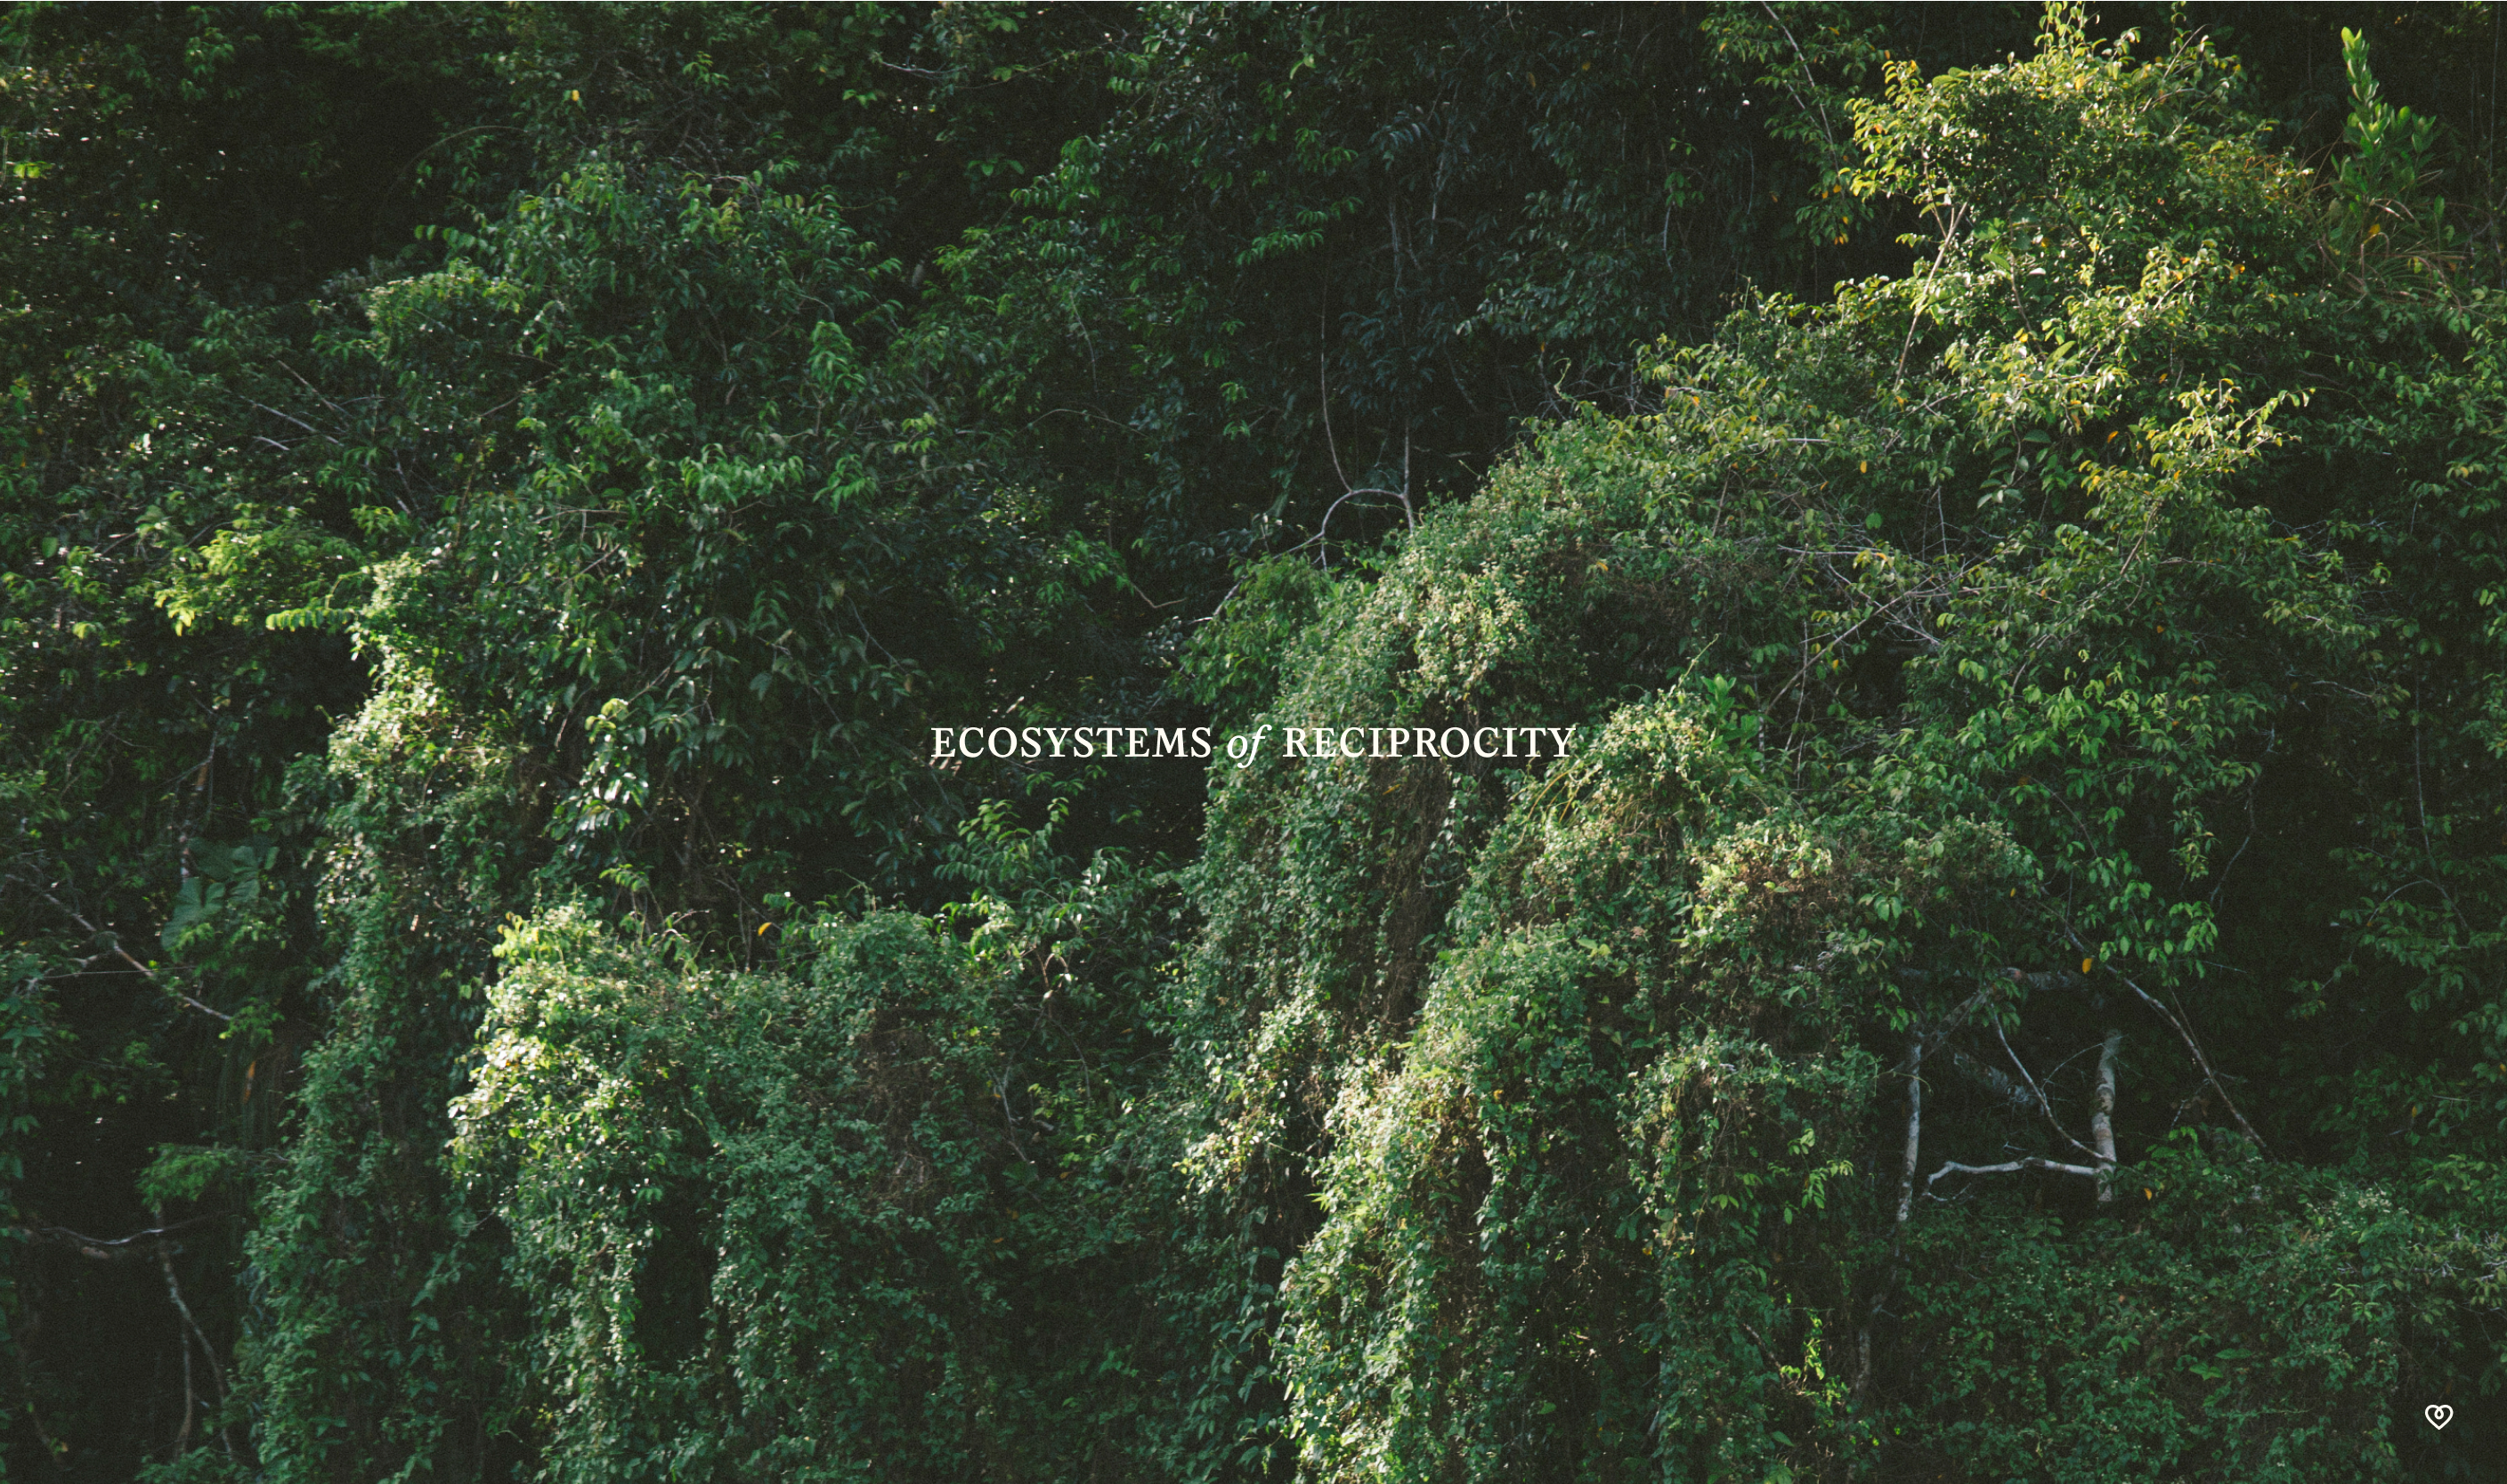 Hero image of rainforest background with the text 'Ecosystems of Reciprocity' over the top 